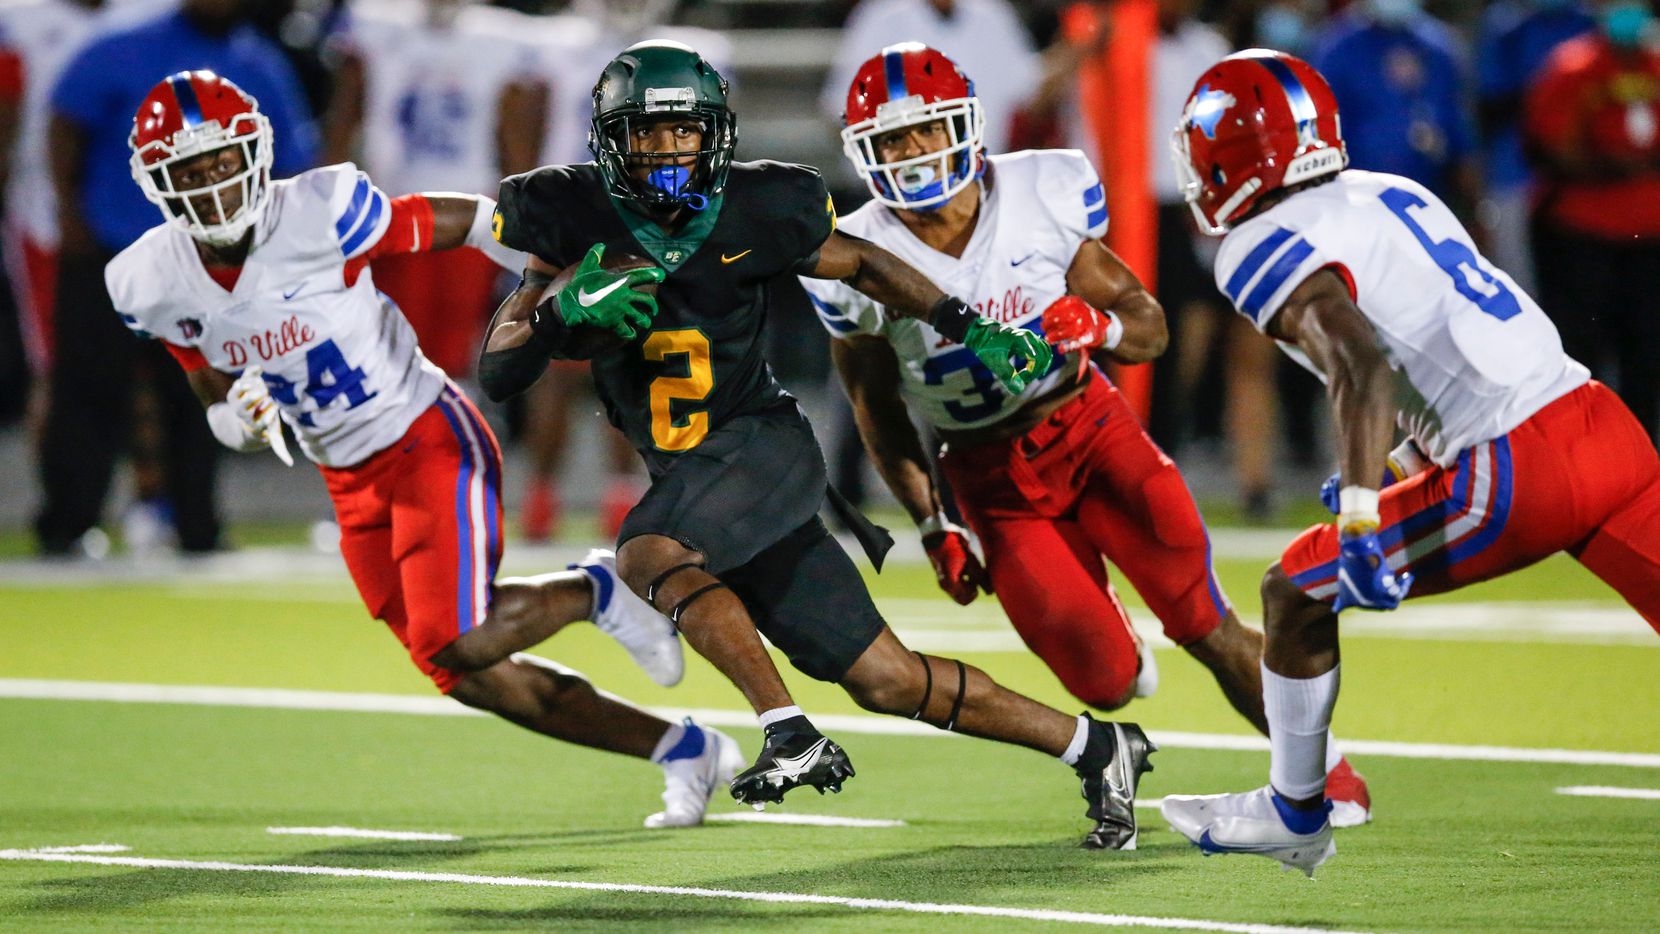 DeSoto senior wide receiver Mike Murphy (2) carries the ball against the Duncanville defense during the first half of a high school football game at DeSoto High School, Friday, September 17, 2021. (Brandon Wade/Special Contributor)